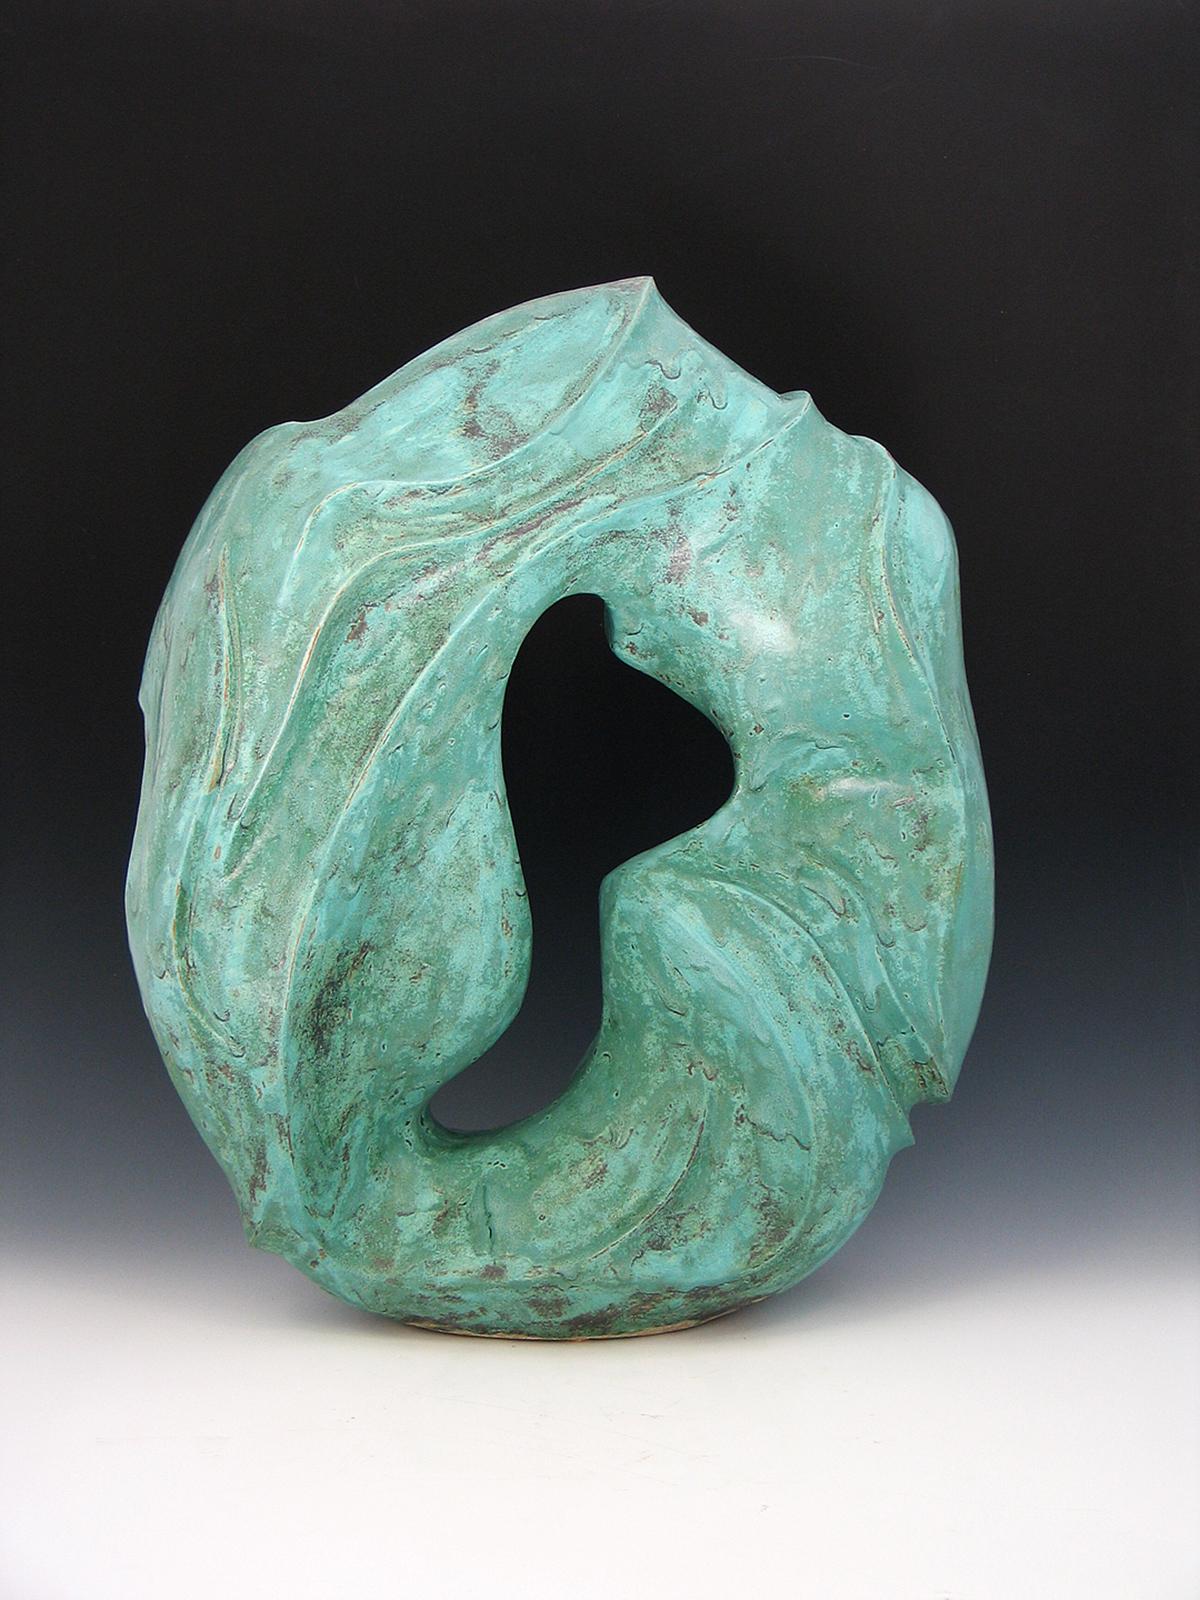 “Water’s Way”, bright aqua ceramic with swirling marks of flowing water - Sculpture by Elaine Lorenz